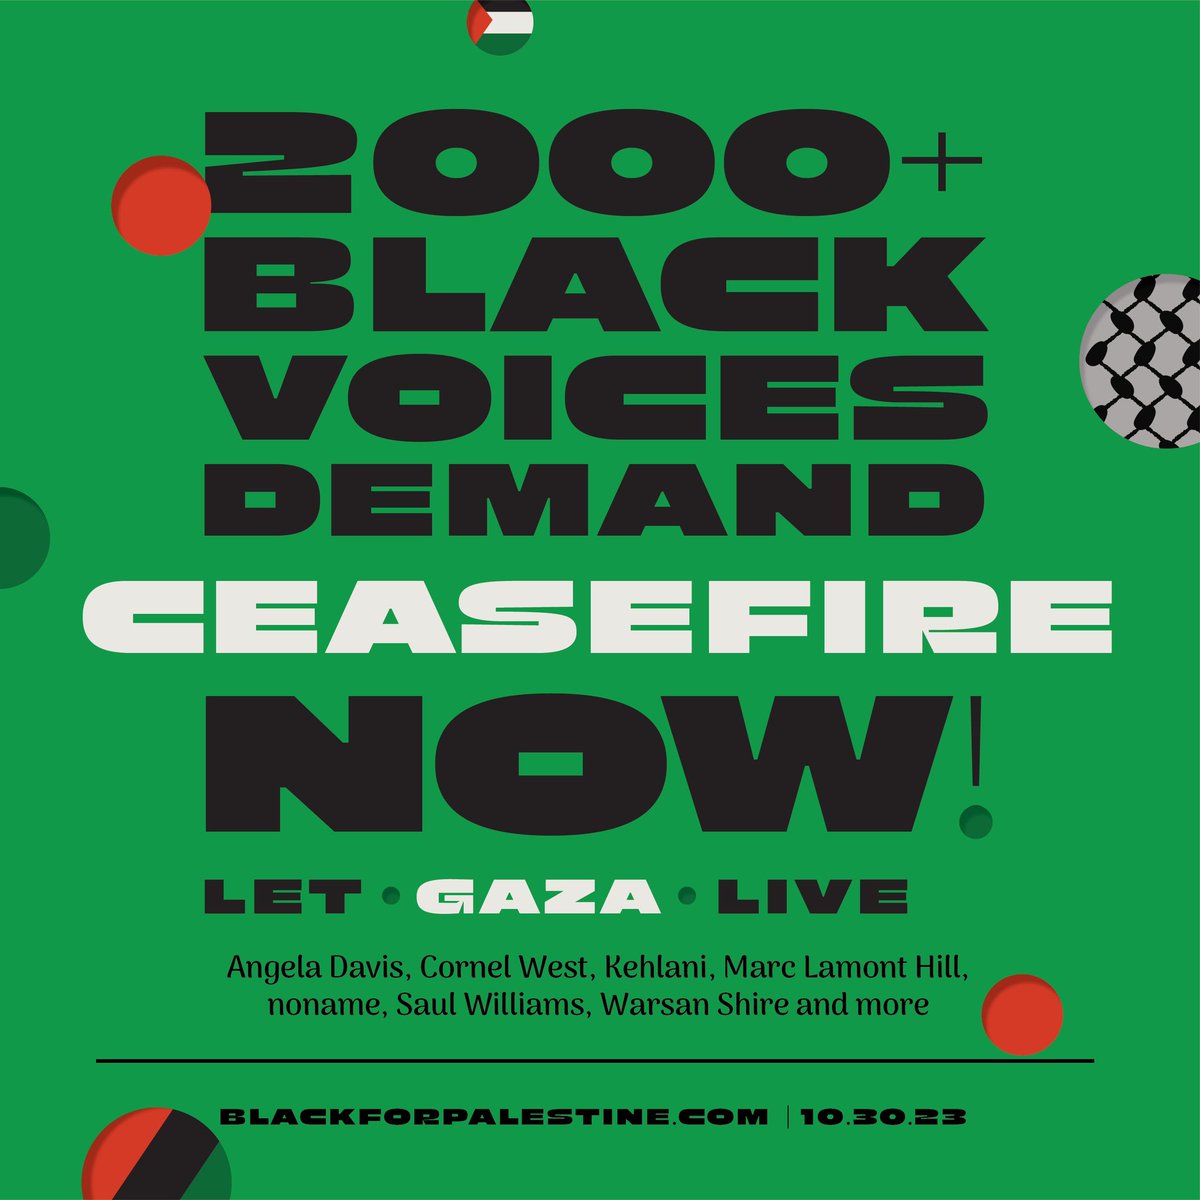 2,000+ BLACK VOICES DEMAND CEASEFIRE NOW! We are make this statement as Black people in solidarity with Palestinian people committed to our shared liberation The genocide in Gaza is an EMERGENCY and we must act NOW. SIGN & SHARE: bit.ly/b4pgaza